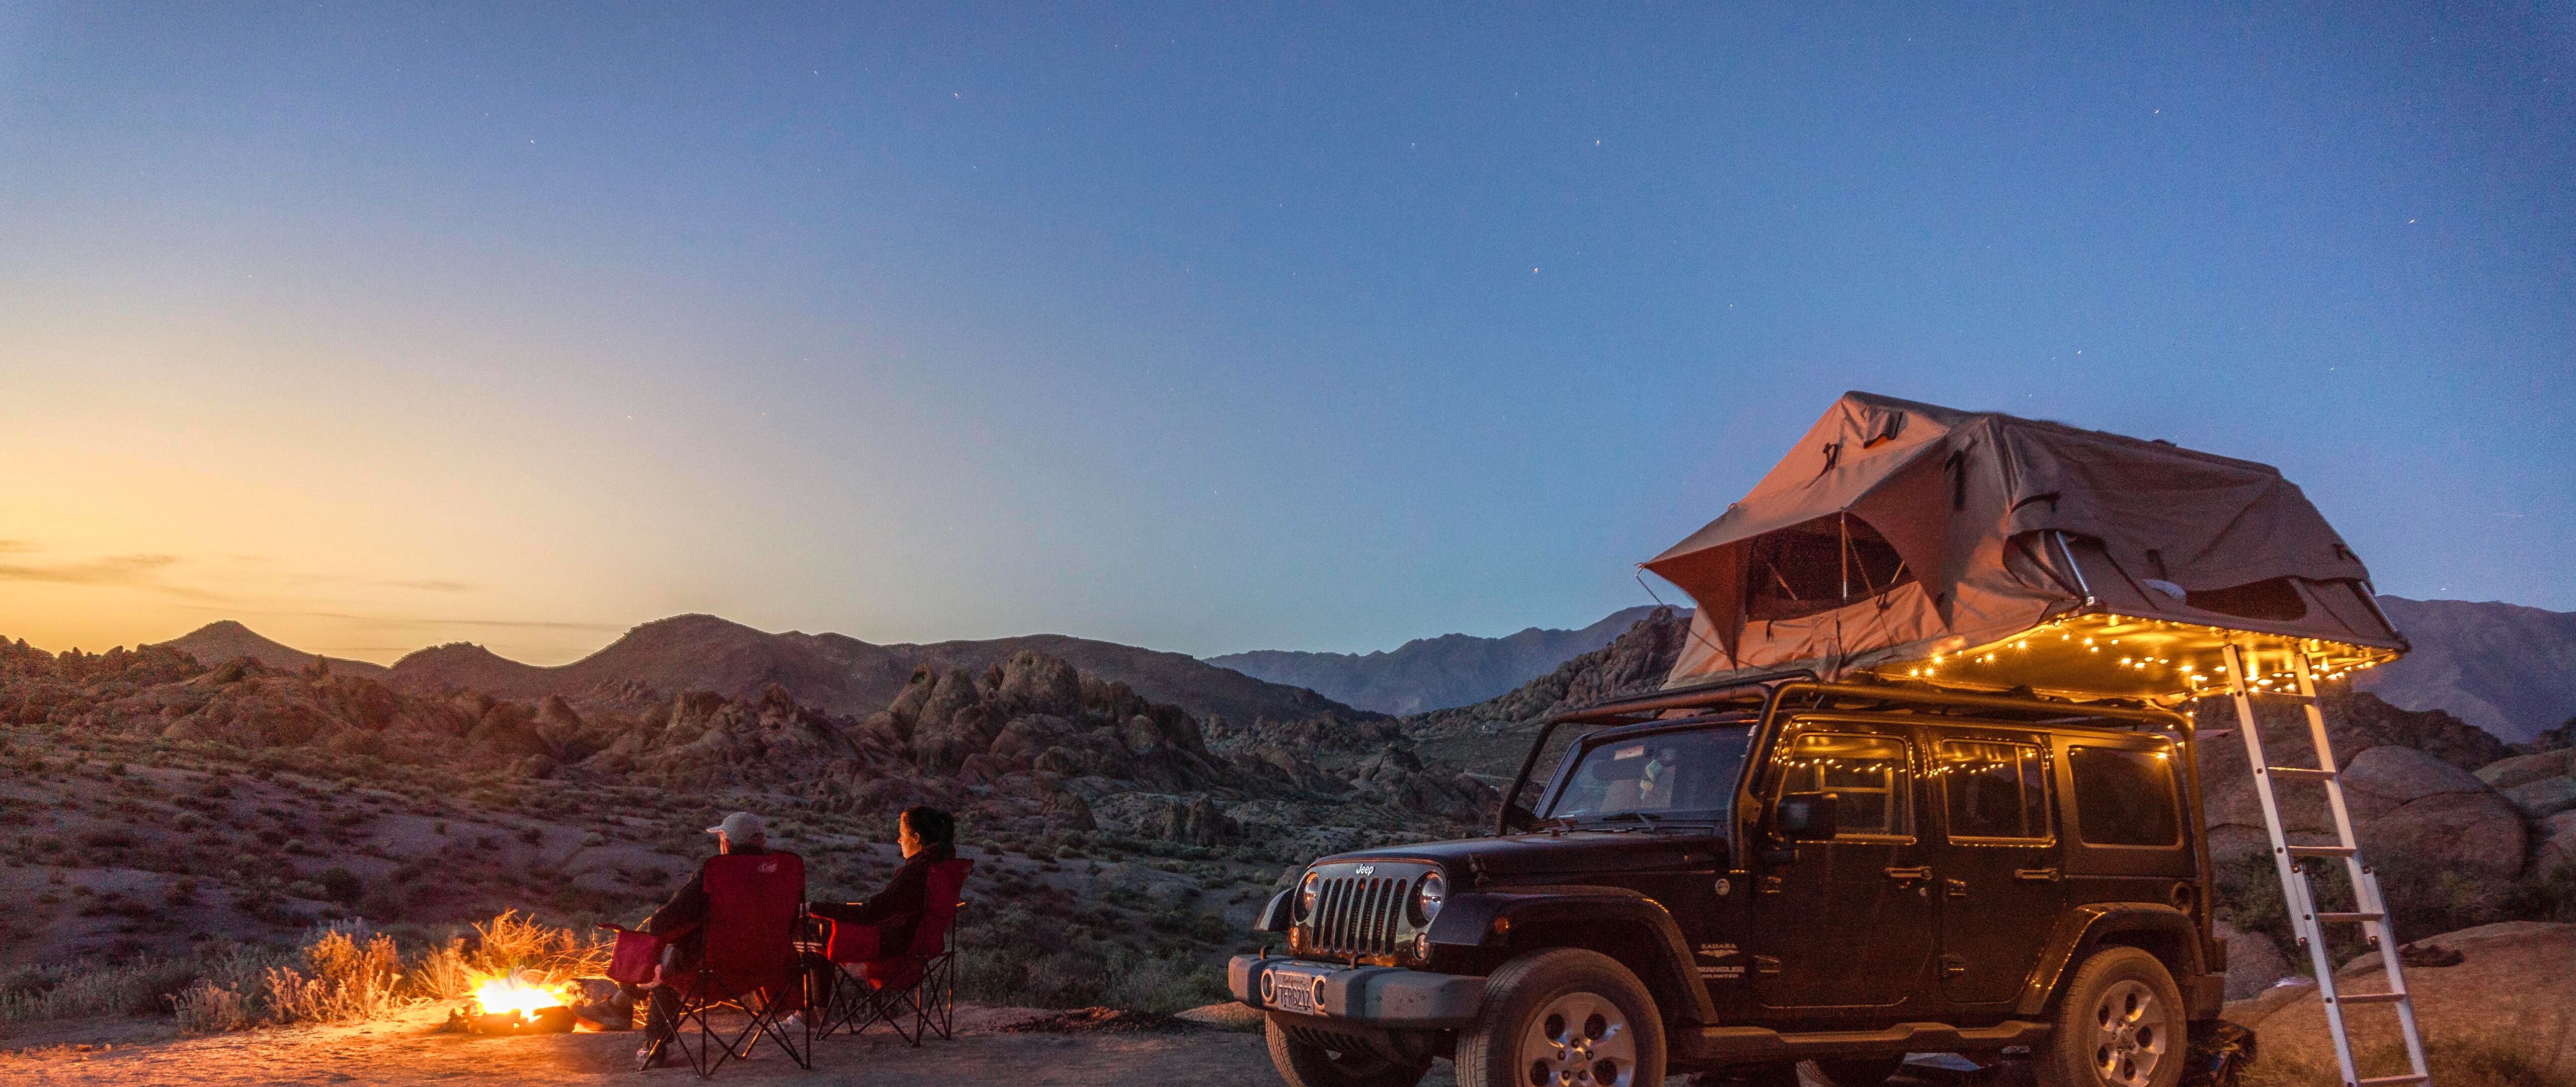 A jeep with a tent on top parked in front of a campfire in the mountains. - Camping